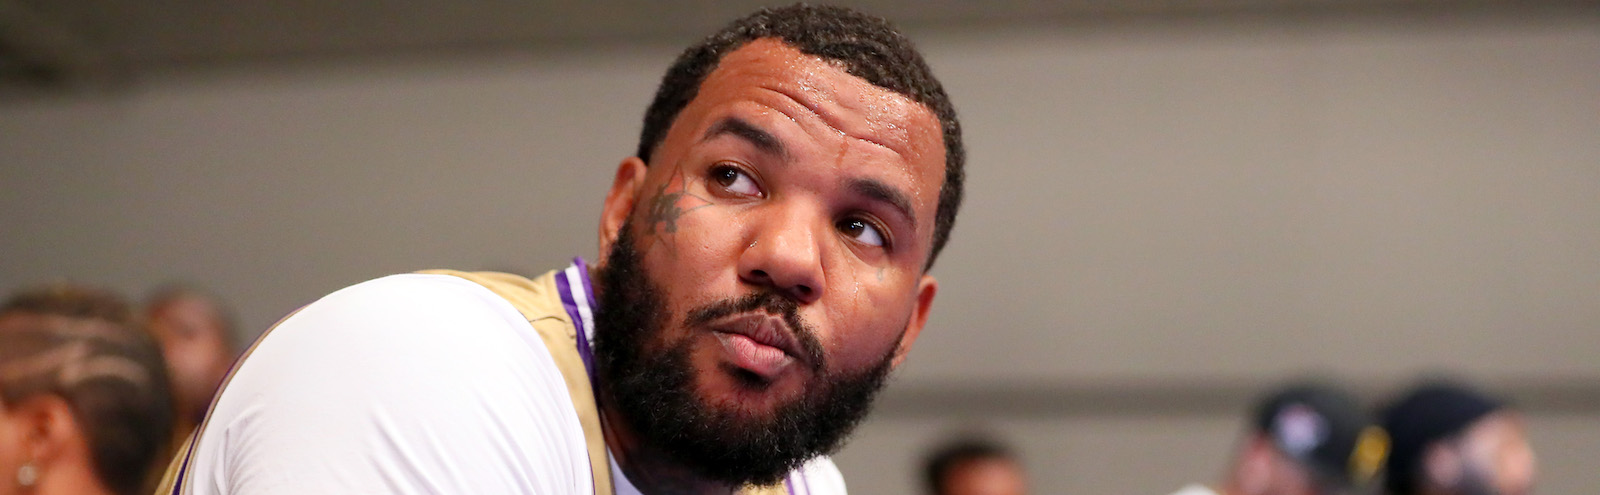 The Game 2019 BET Experience basketball game